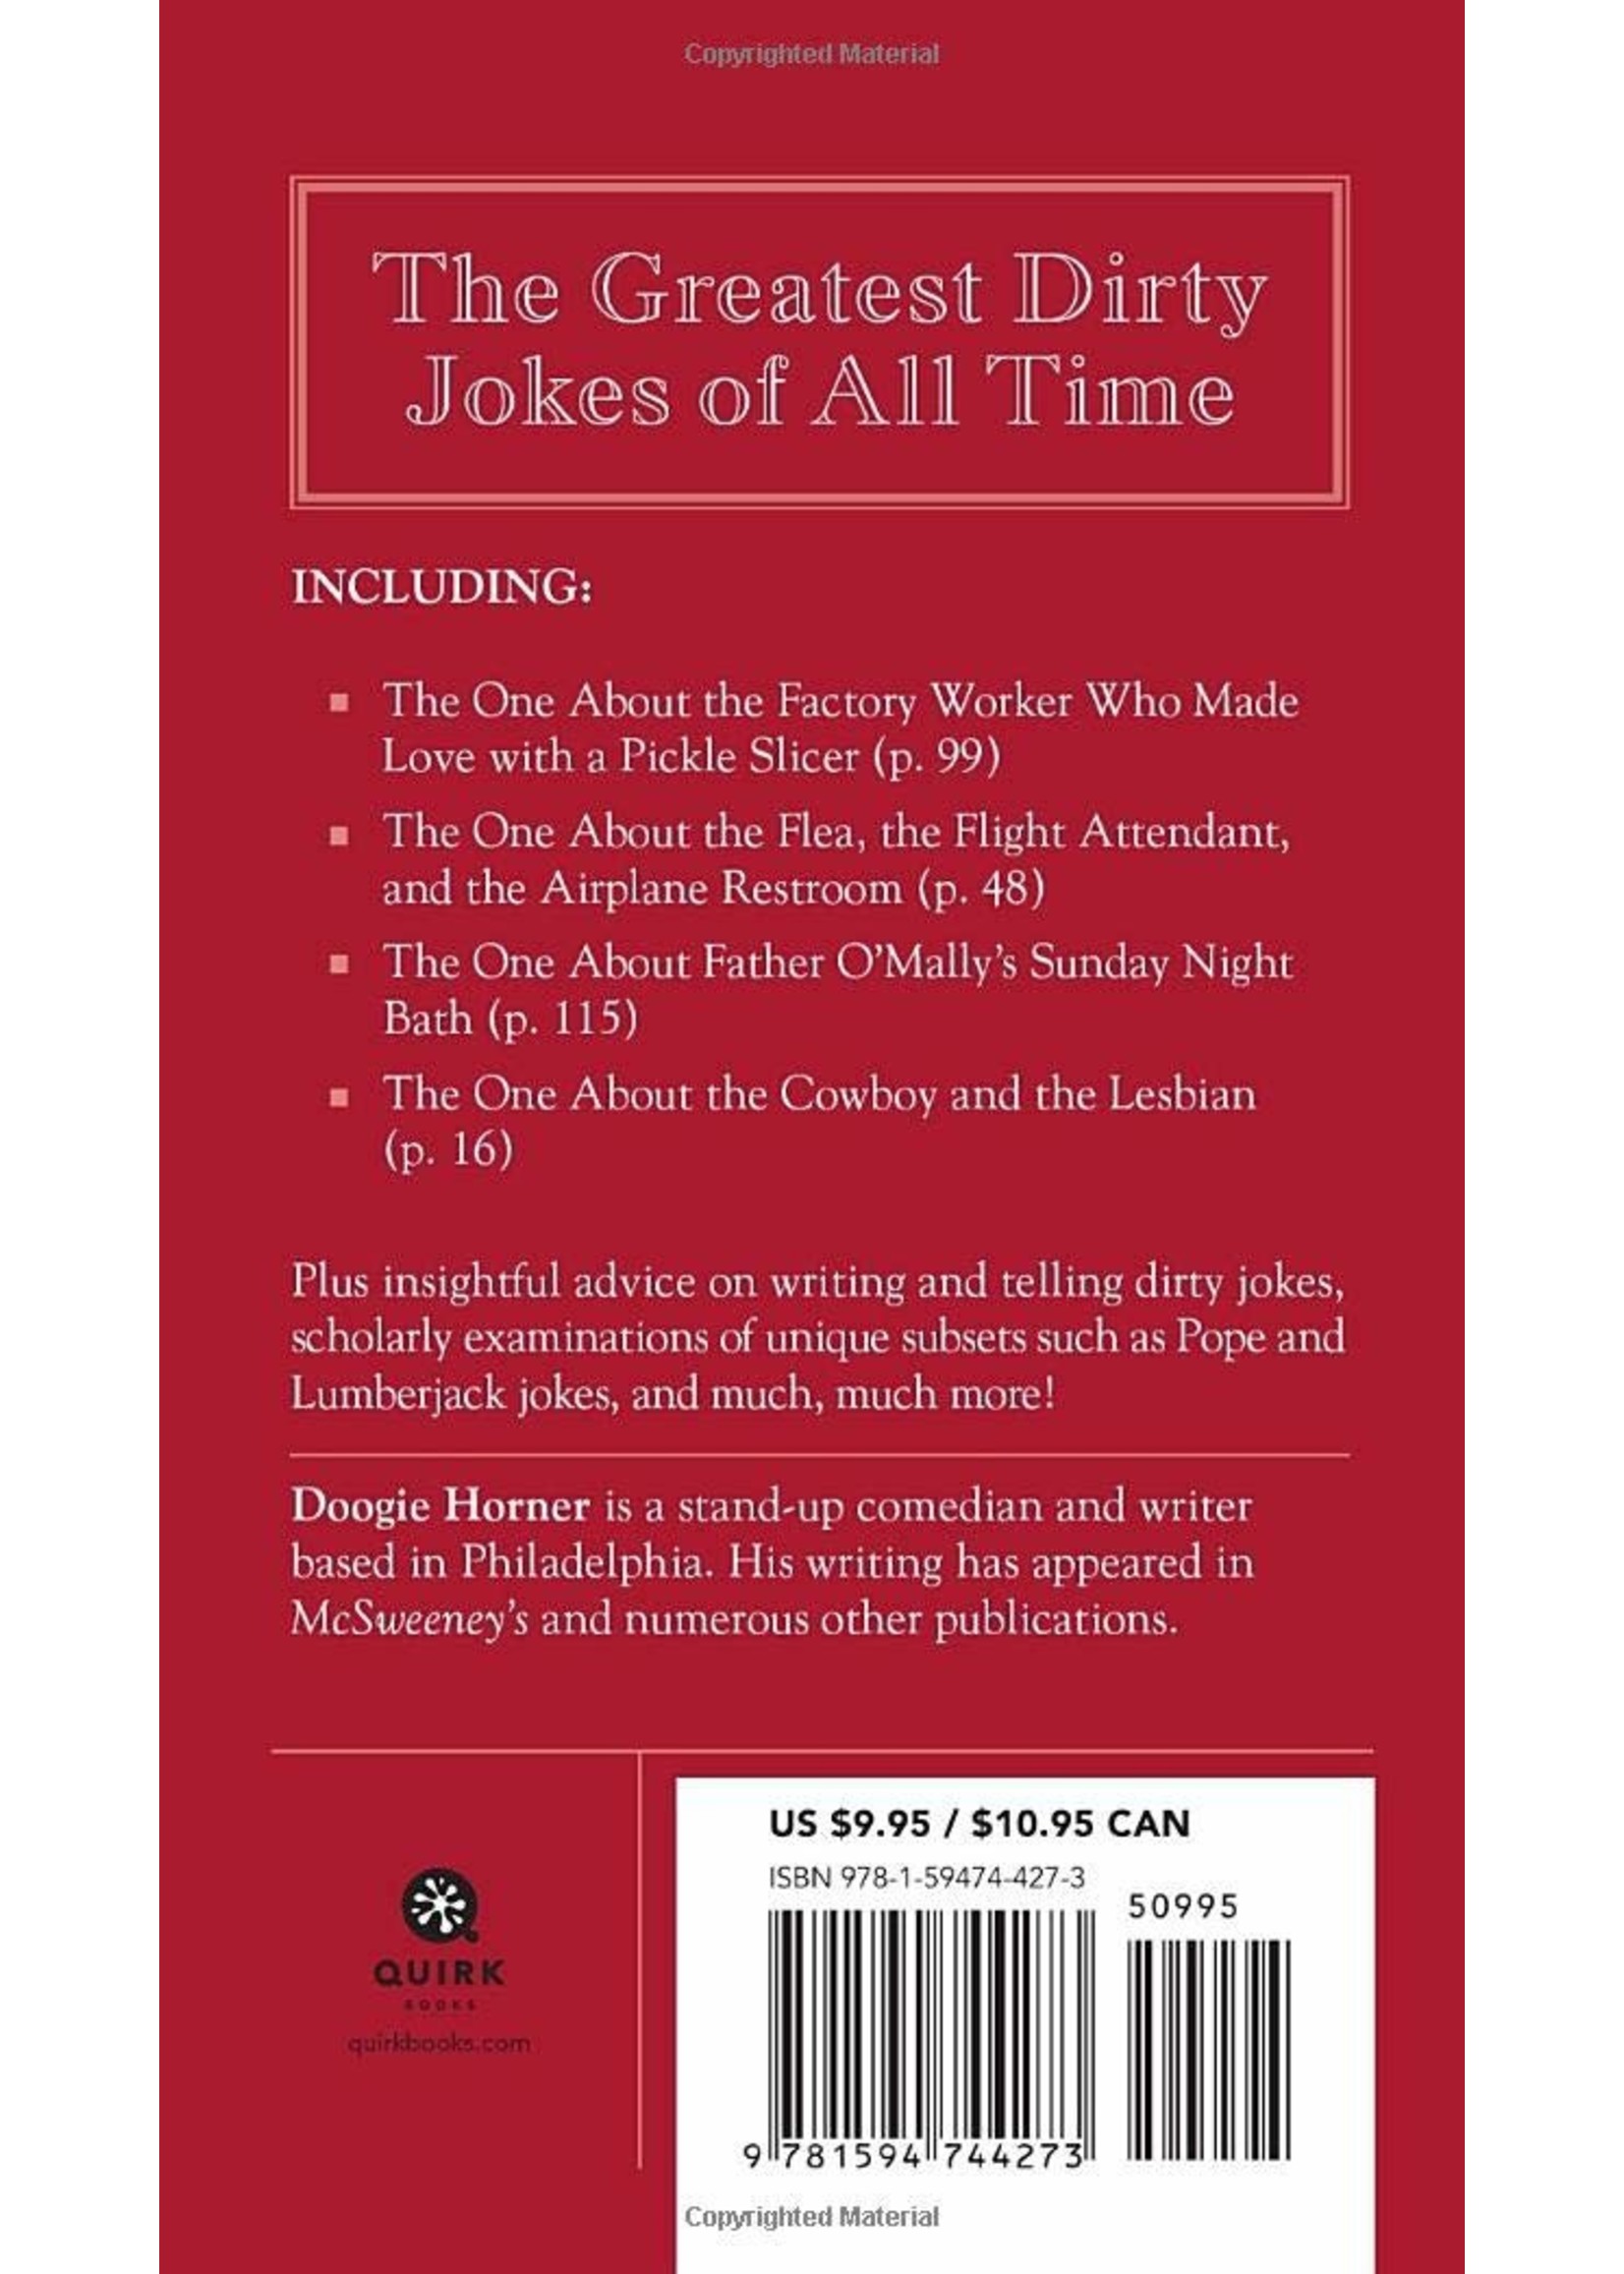 DIRTY JOKES EVERY MAN SHOULD KNOW - BOOK